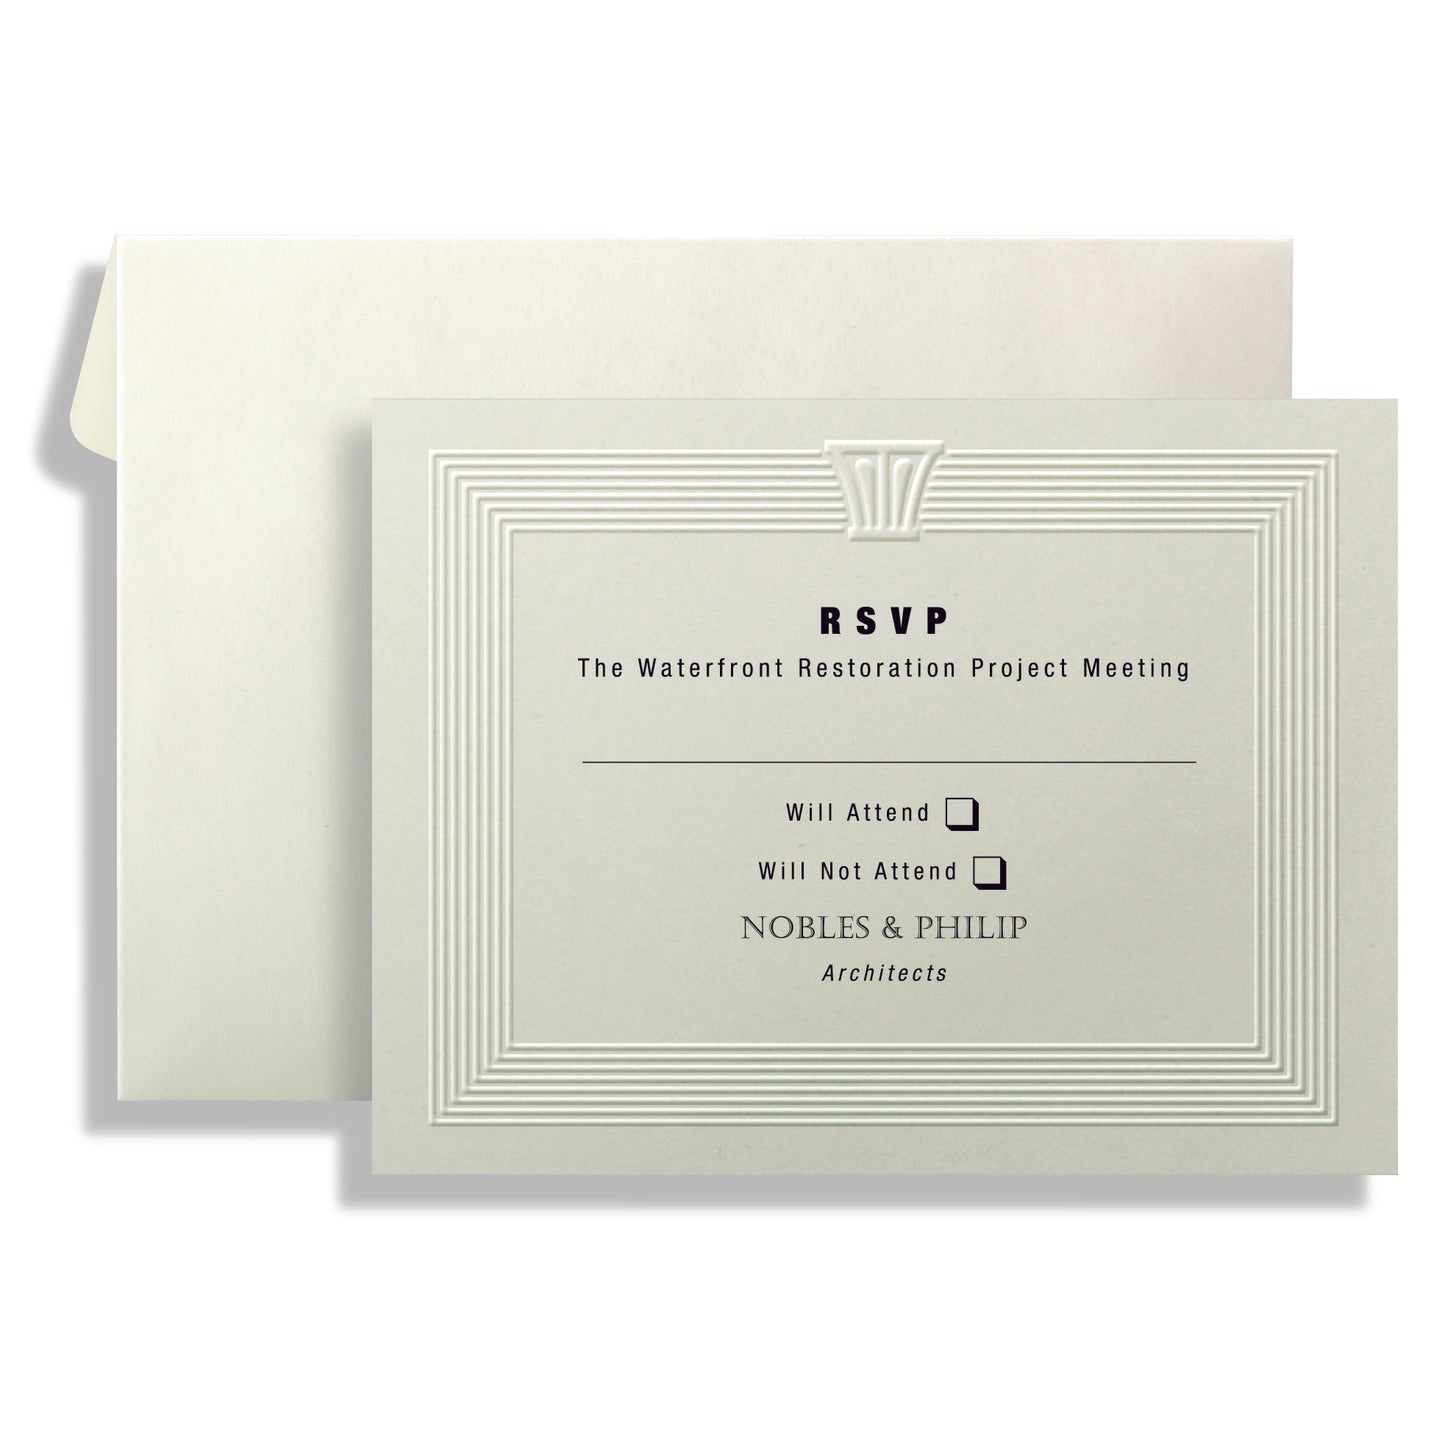 St. James® Overtures® Reply Cards, Capital Emboss, Ivory, 40 Sets